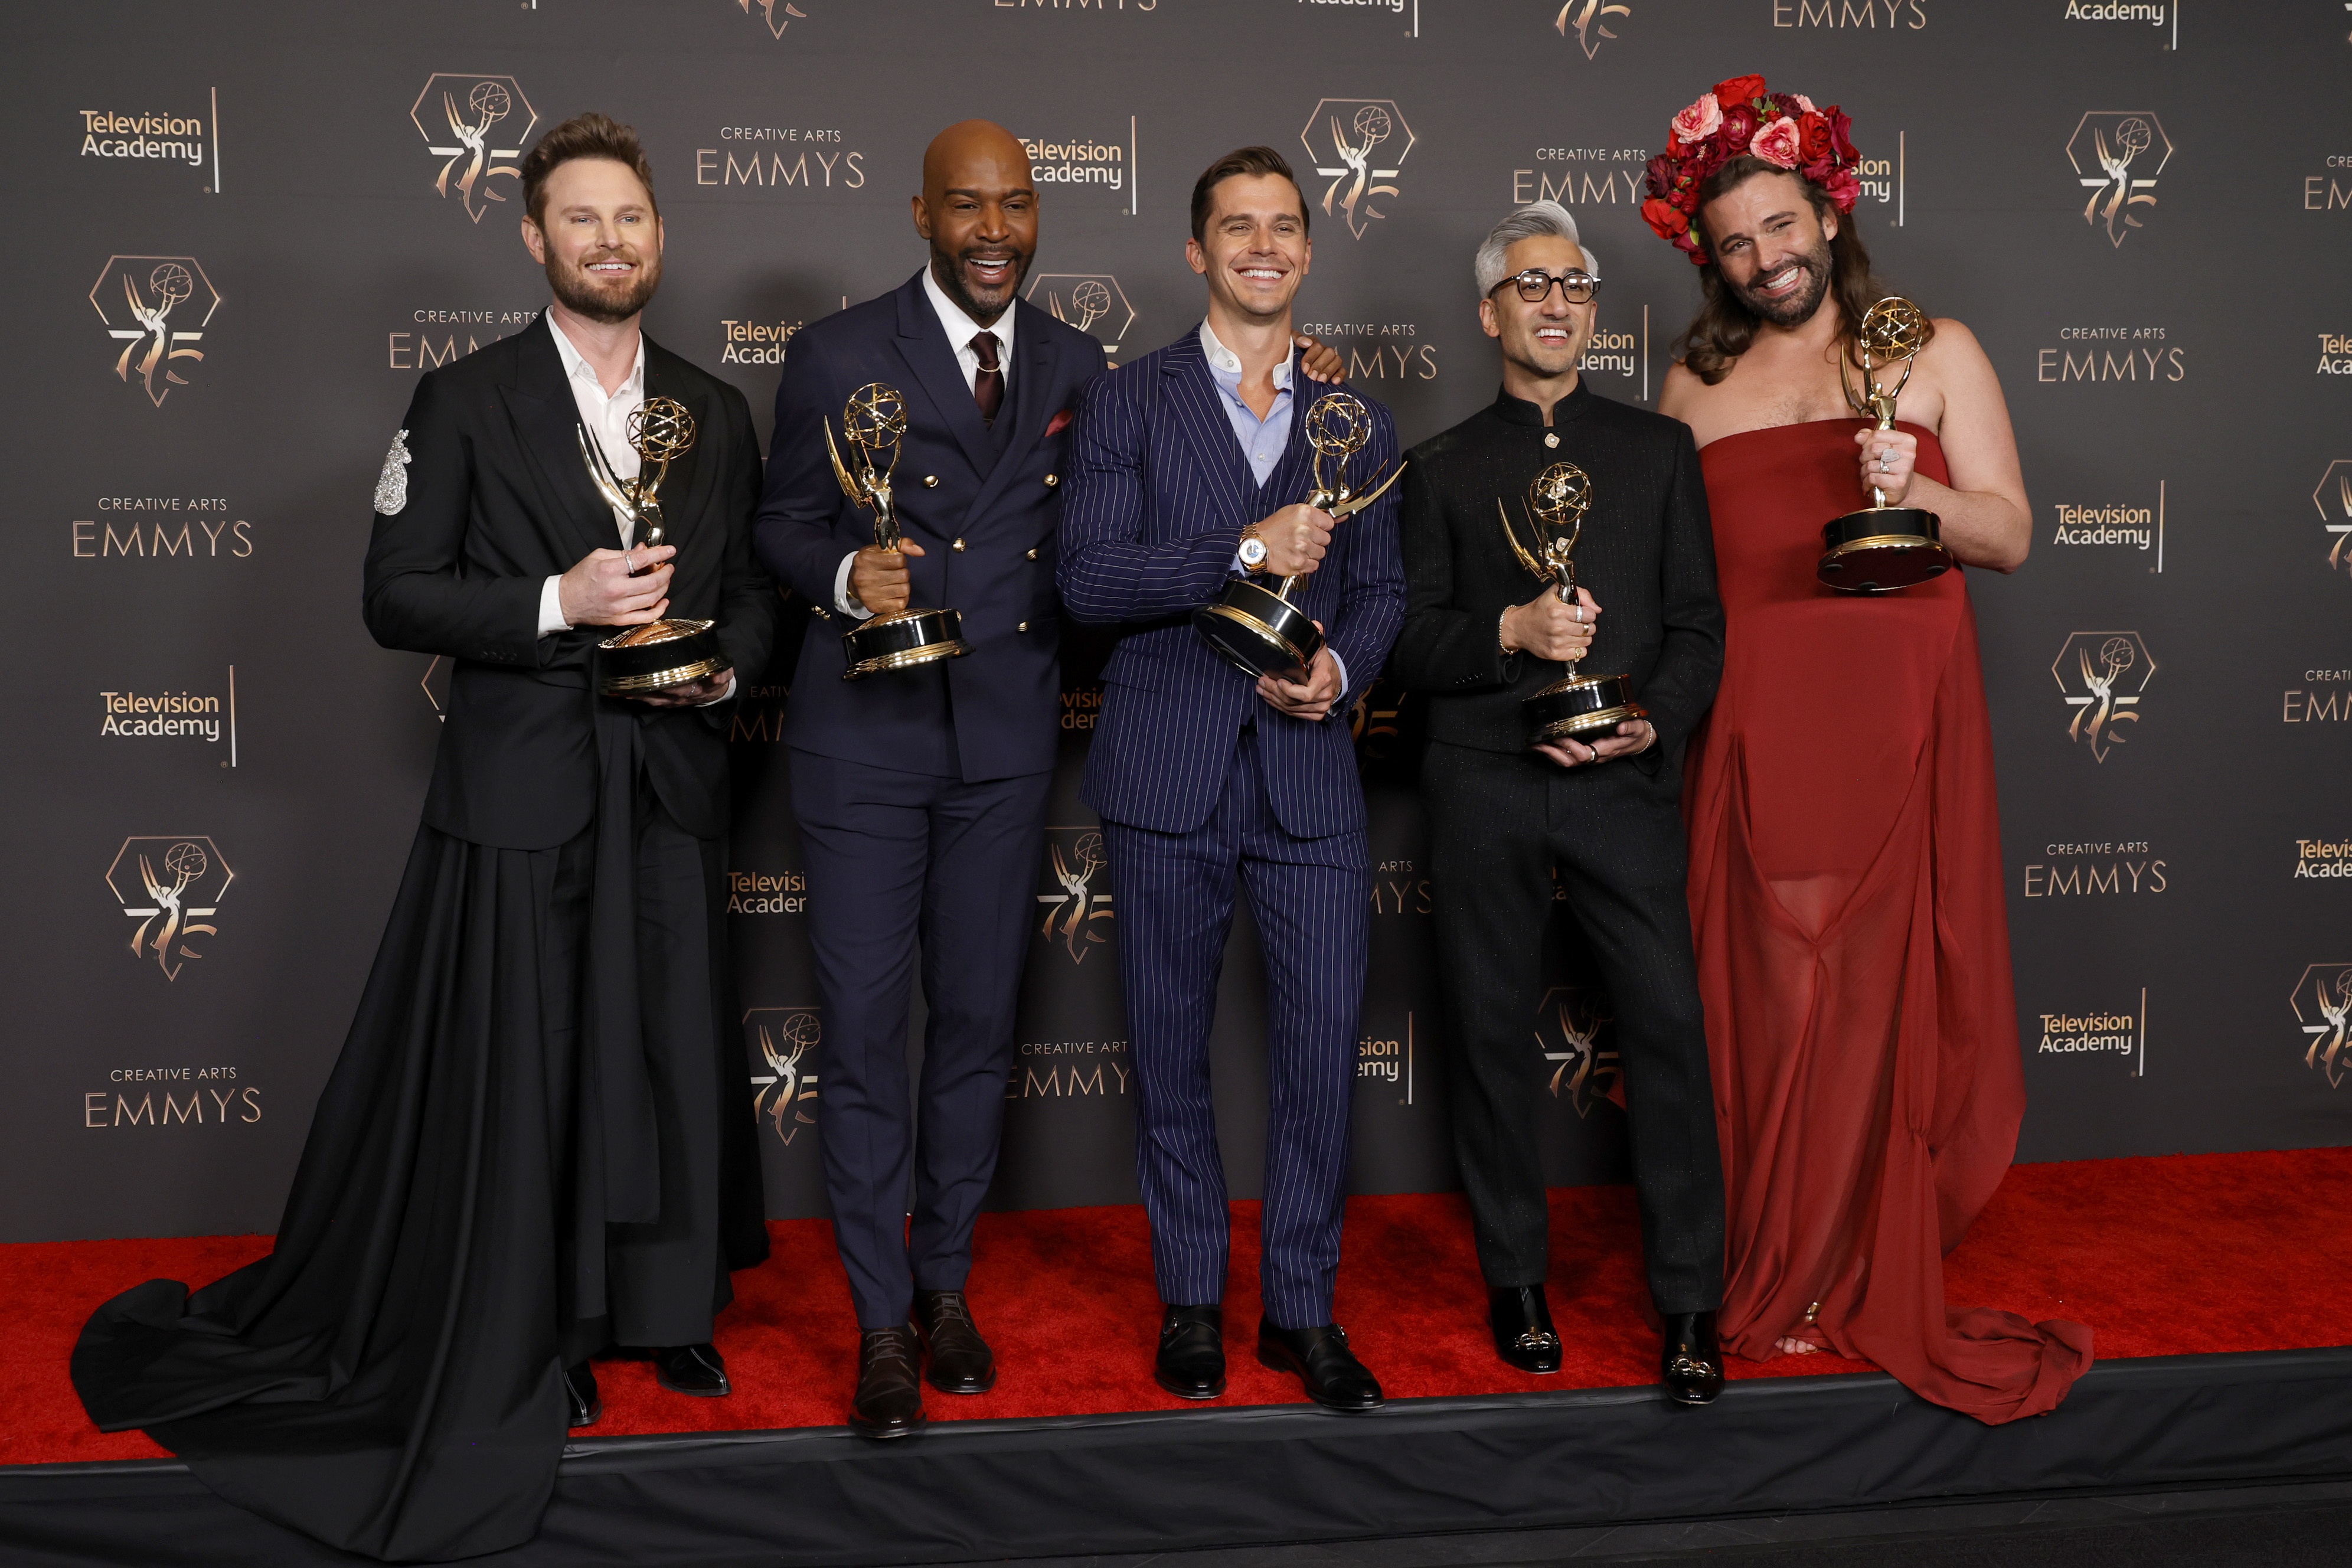 the hosts holding awards on the red carpet